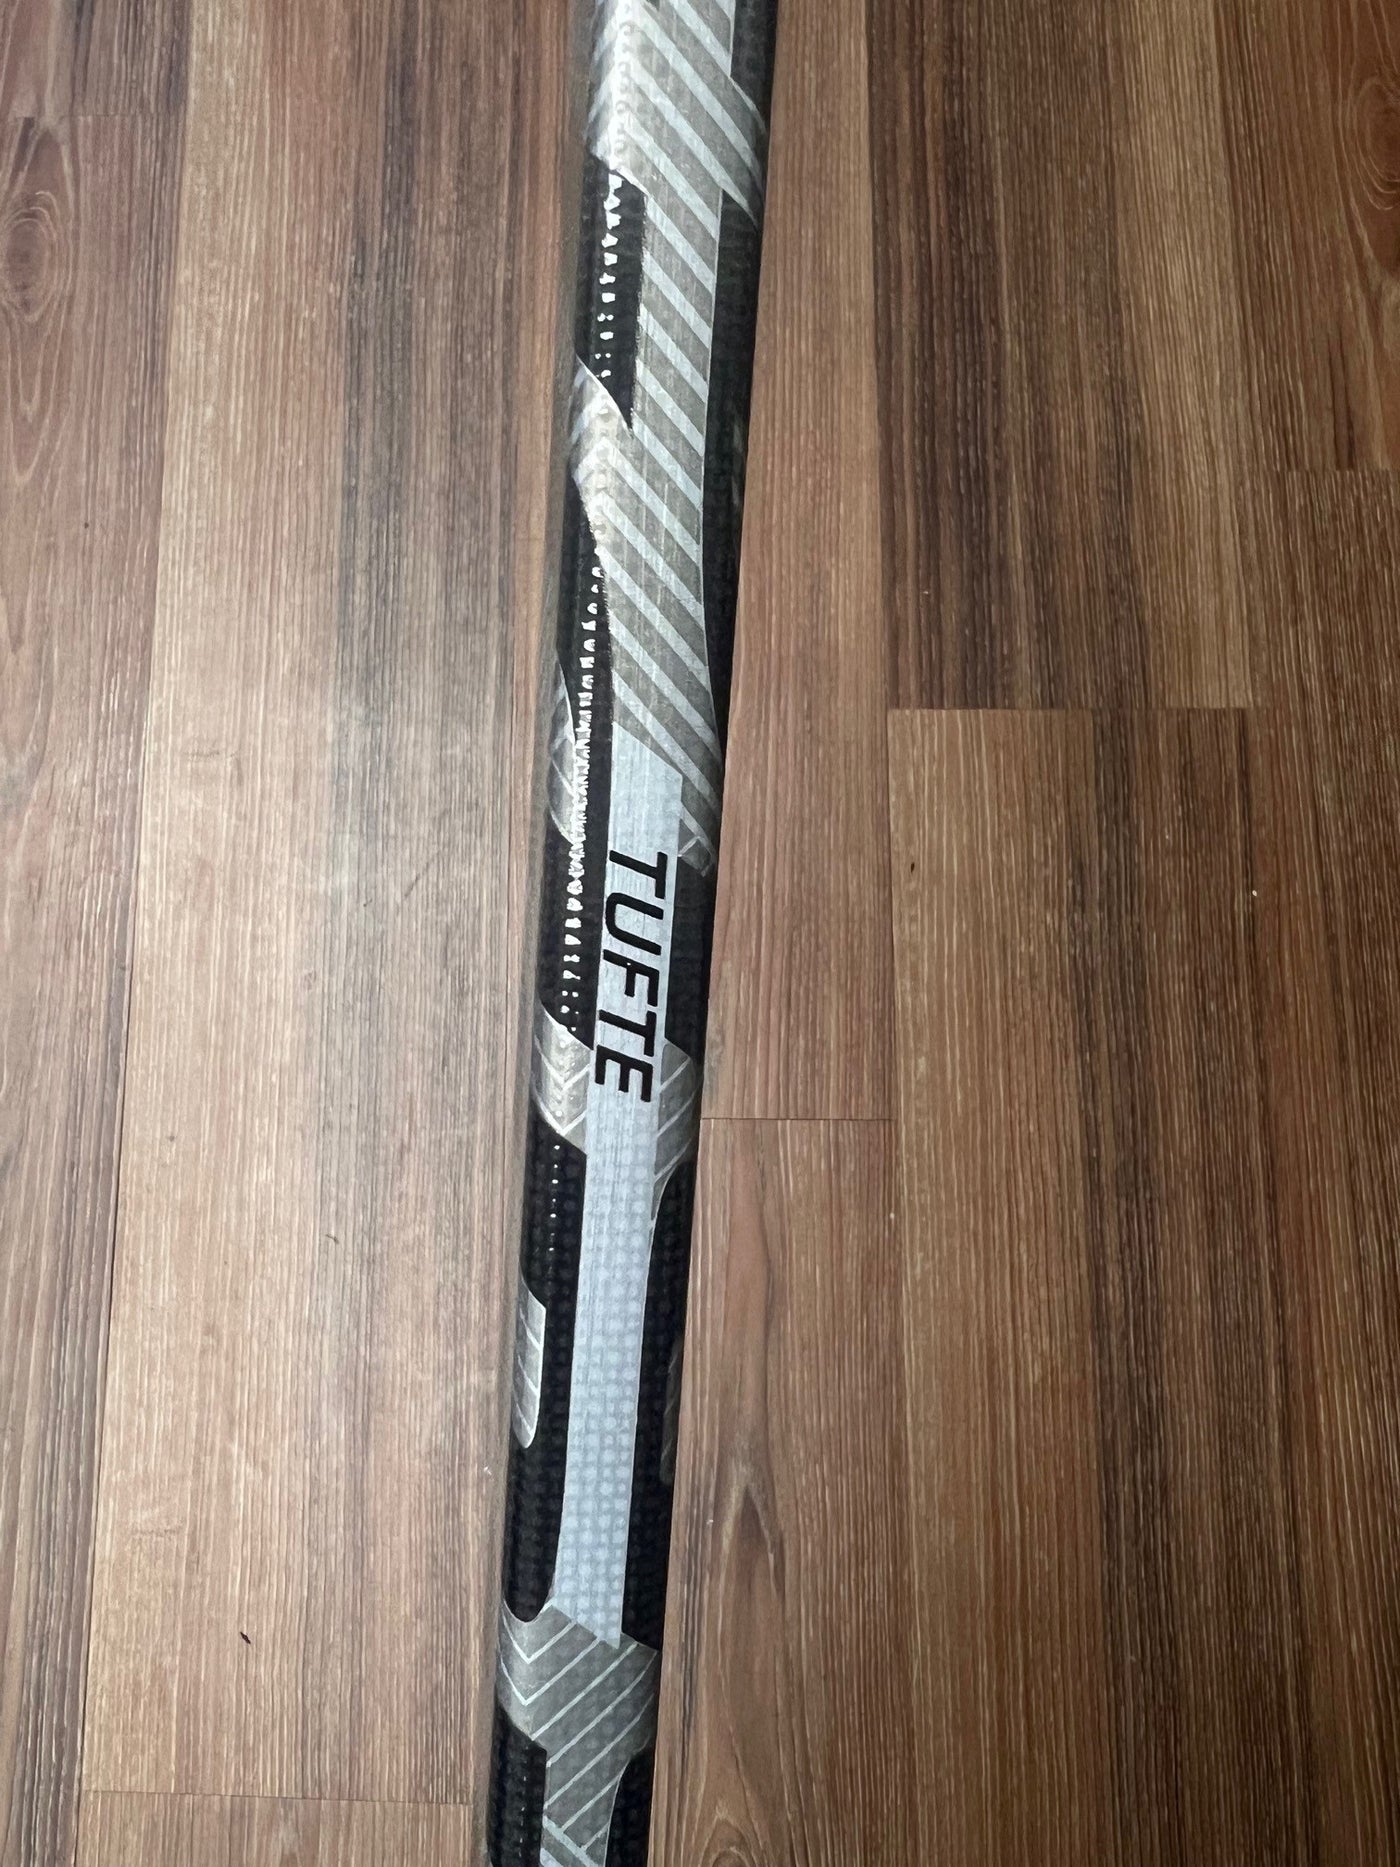 TUFTE NEW WARRIOR TEAM ISSUED STICK - View of name on stick